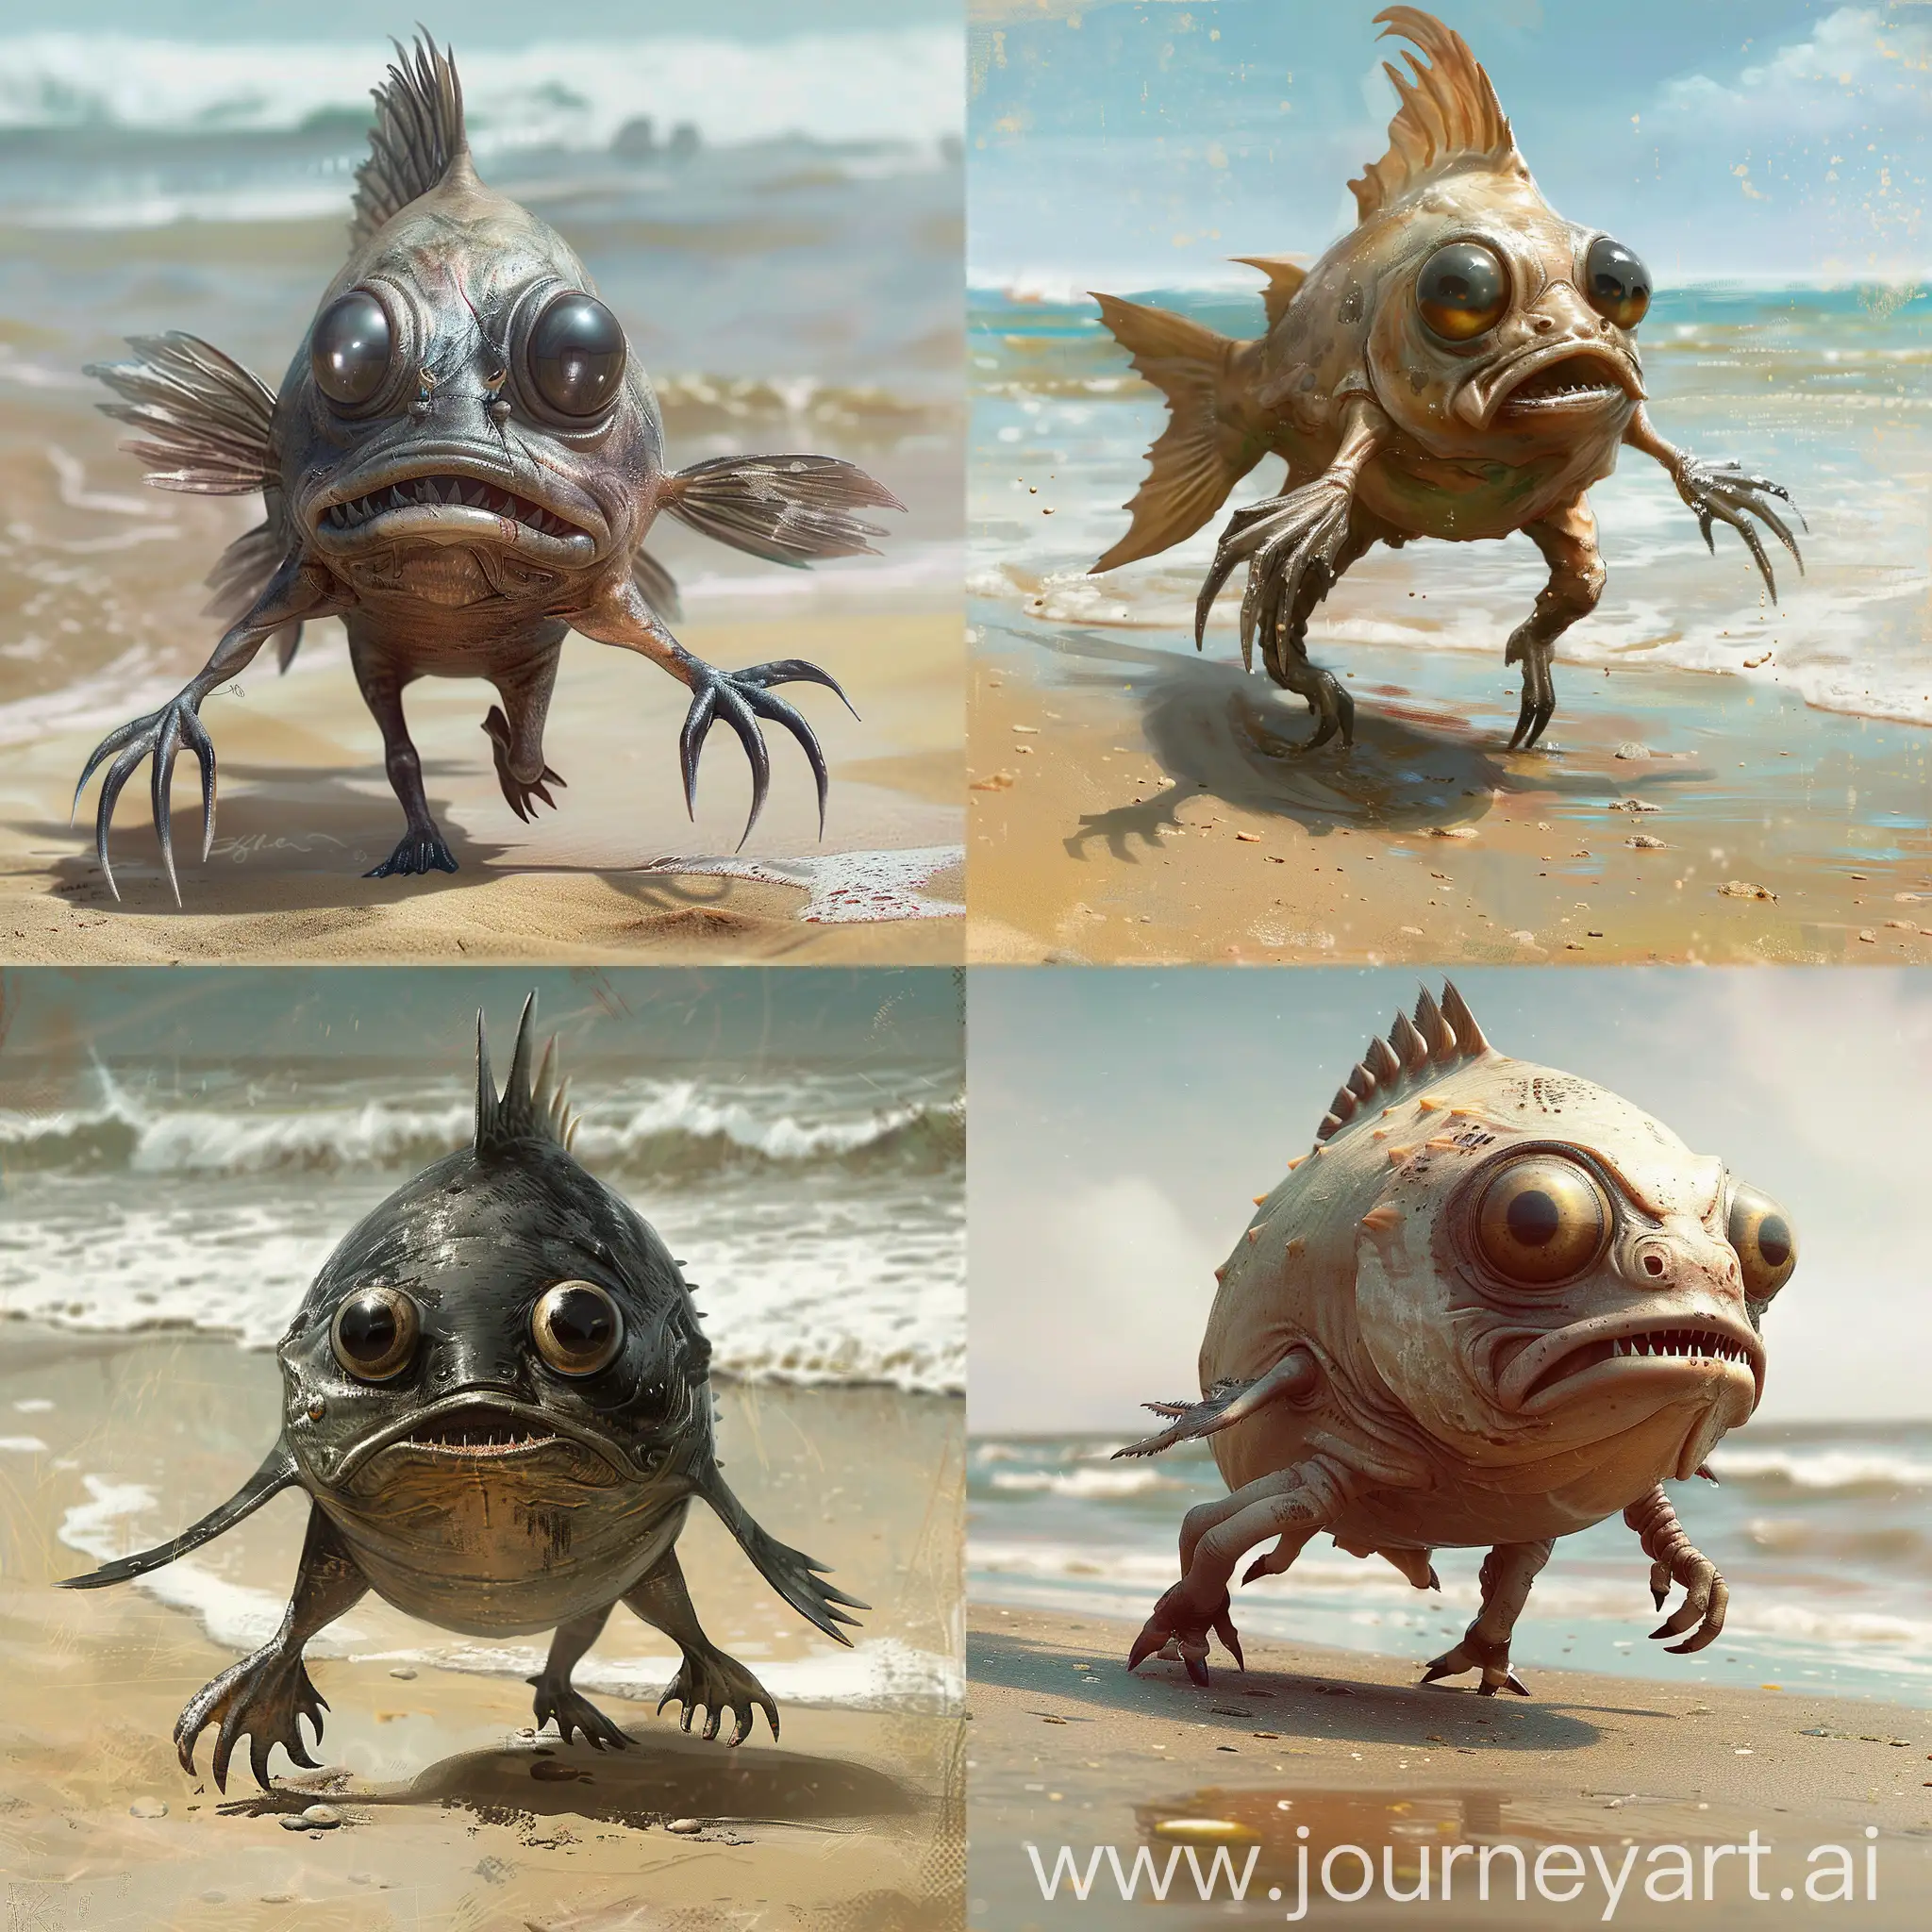 Walking-Fish-Creature-with-Clawed-Fins-on-Beach